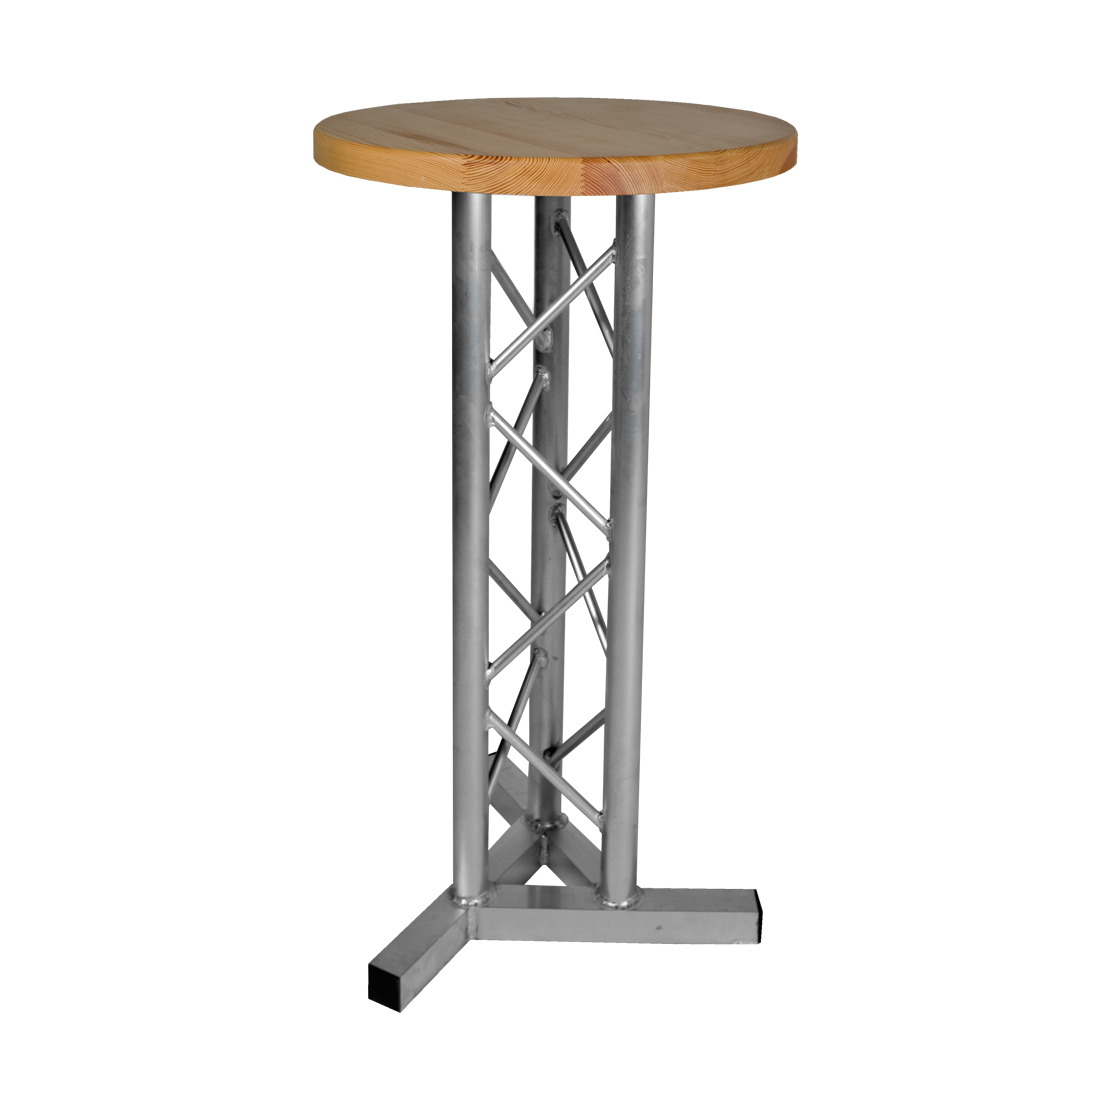 DURATRUSS DT-TABLE 2 3 legs round circle